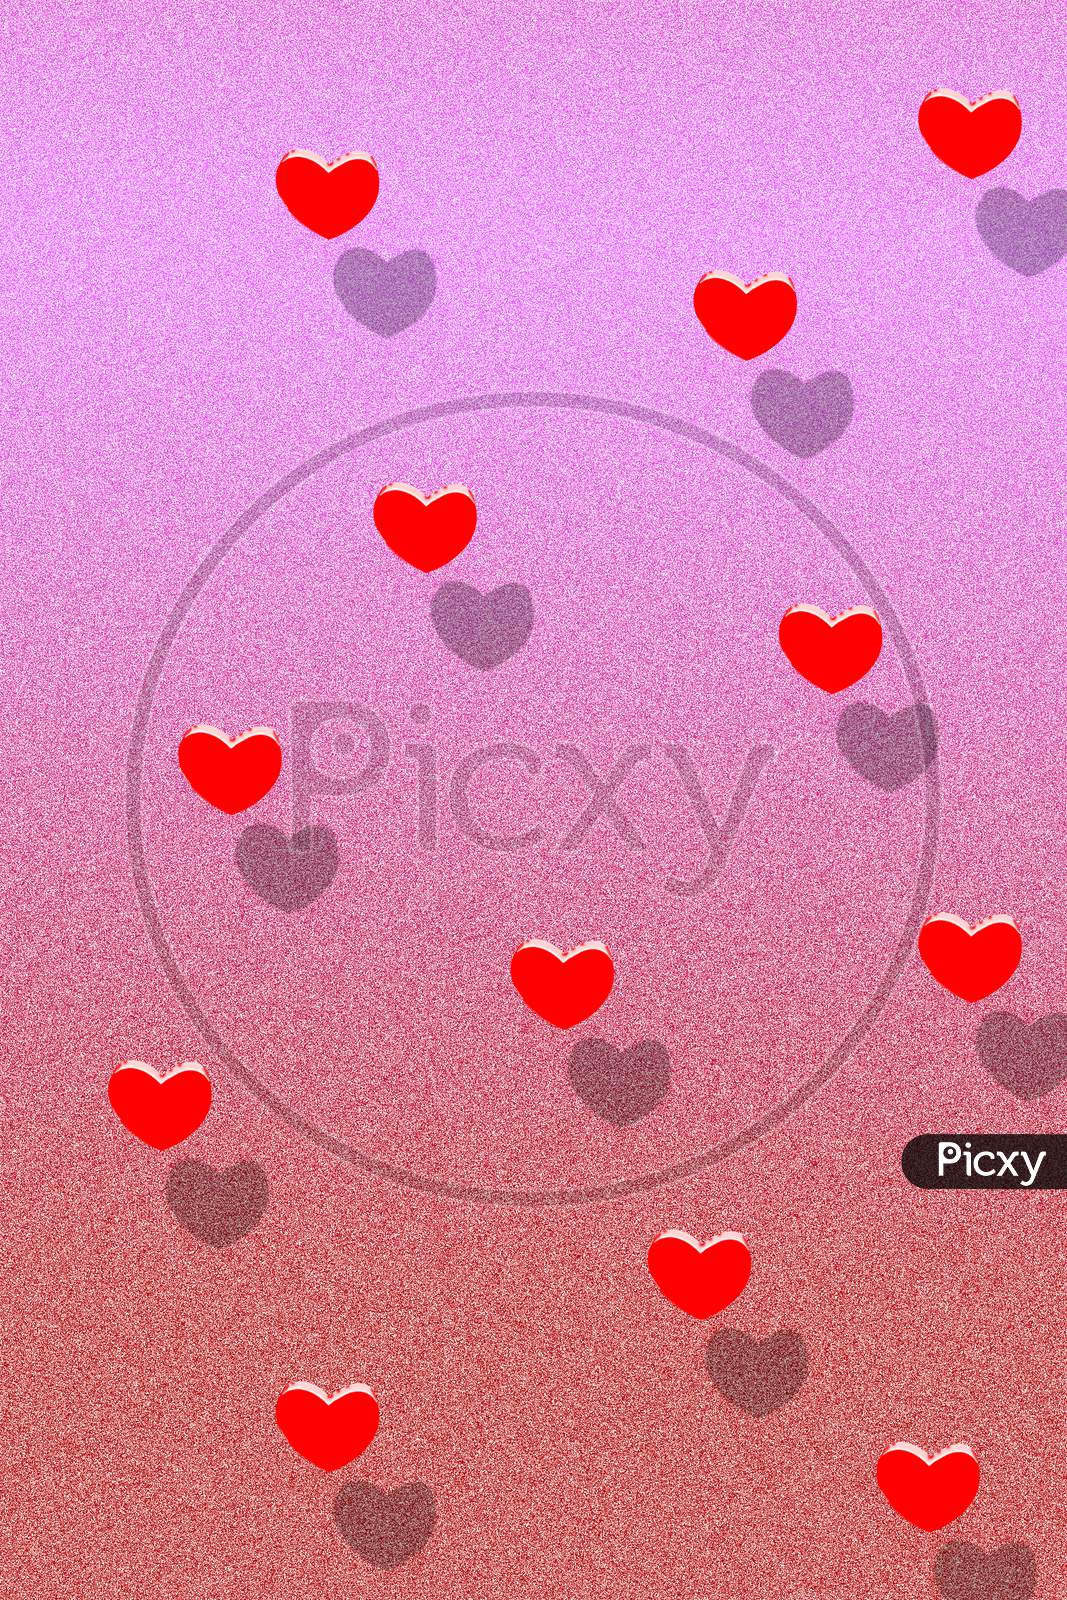 Image of Love Heart Shapes Mobile Wallpaper Abstract-BS981331-Picxy